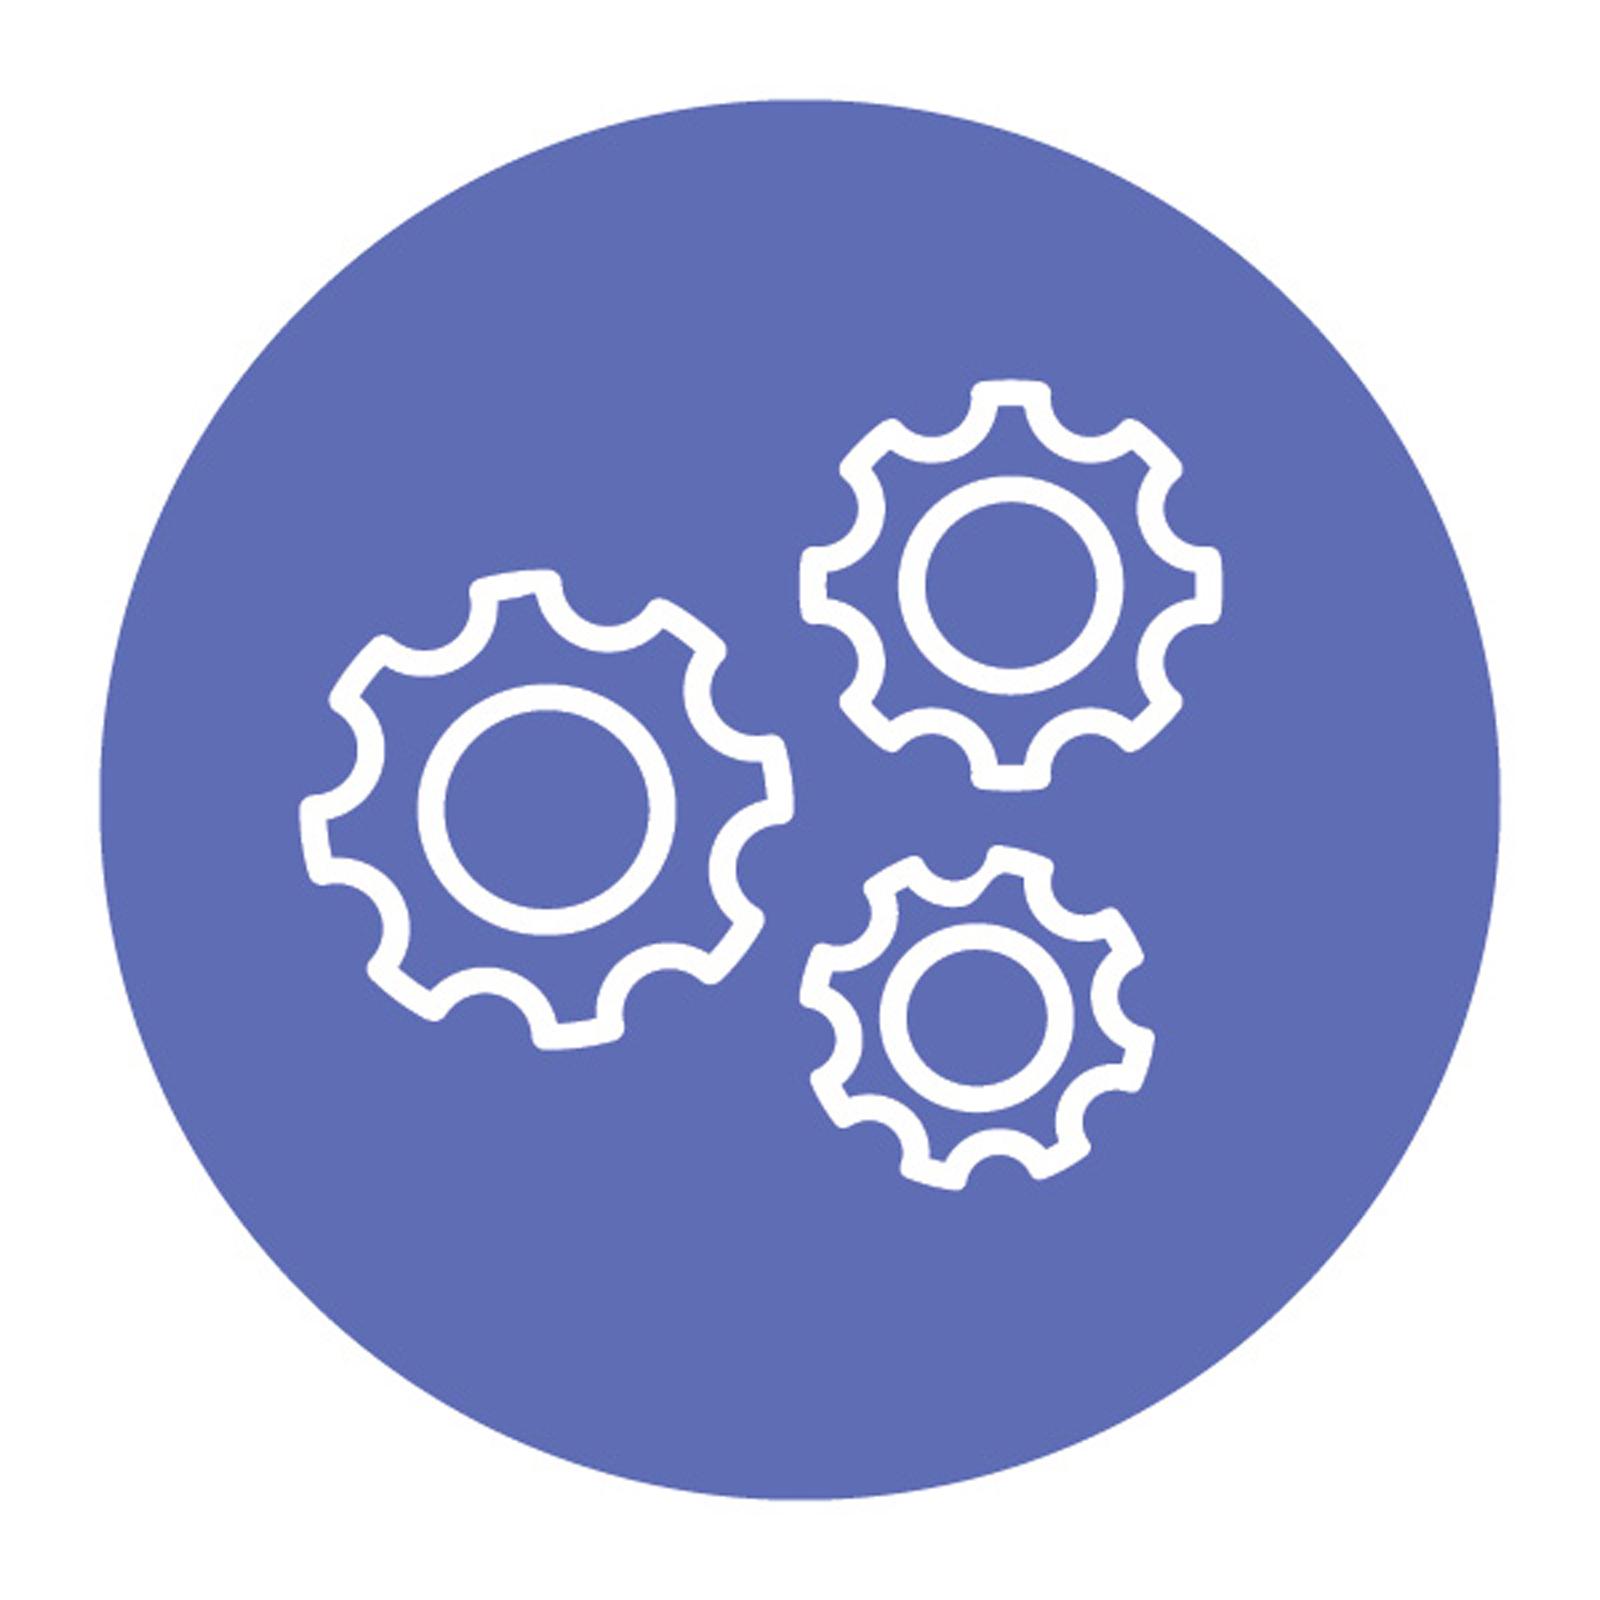 A purple circle with 3 gears in the center